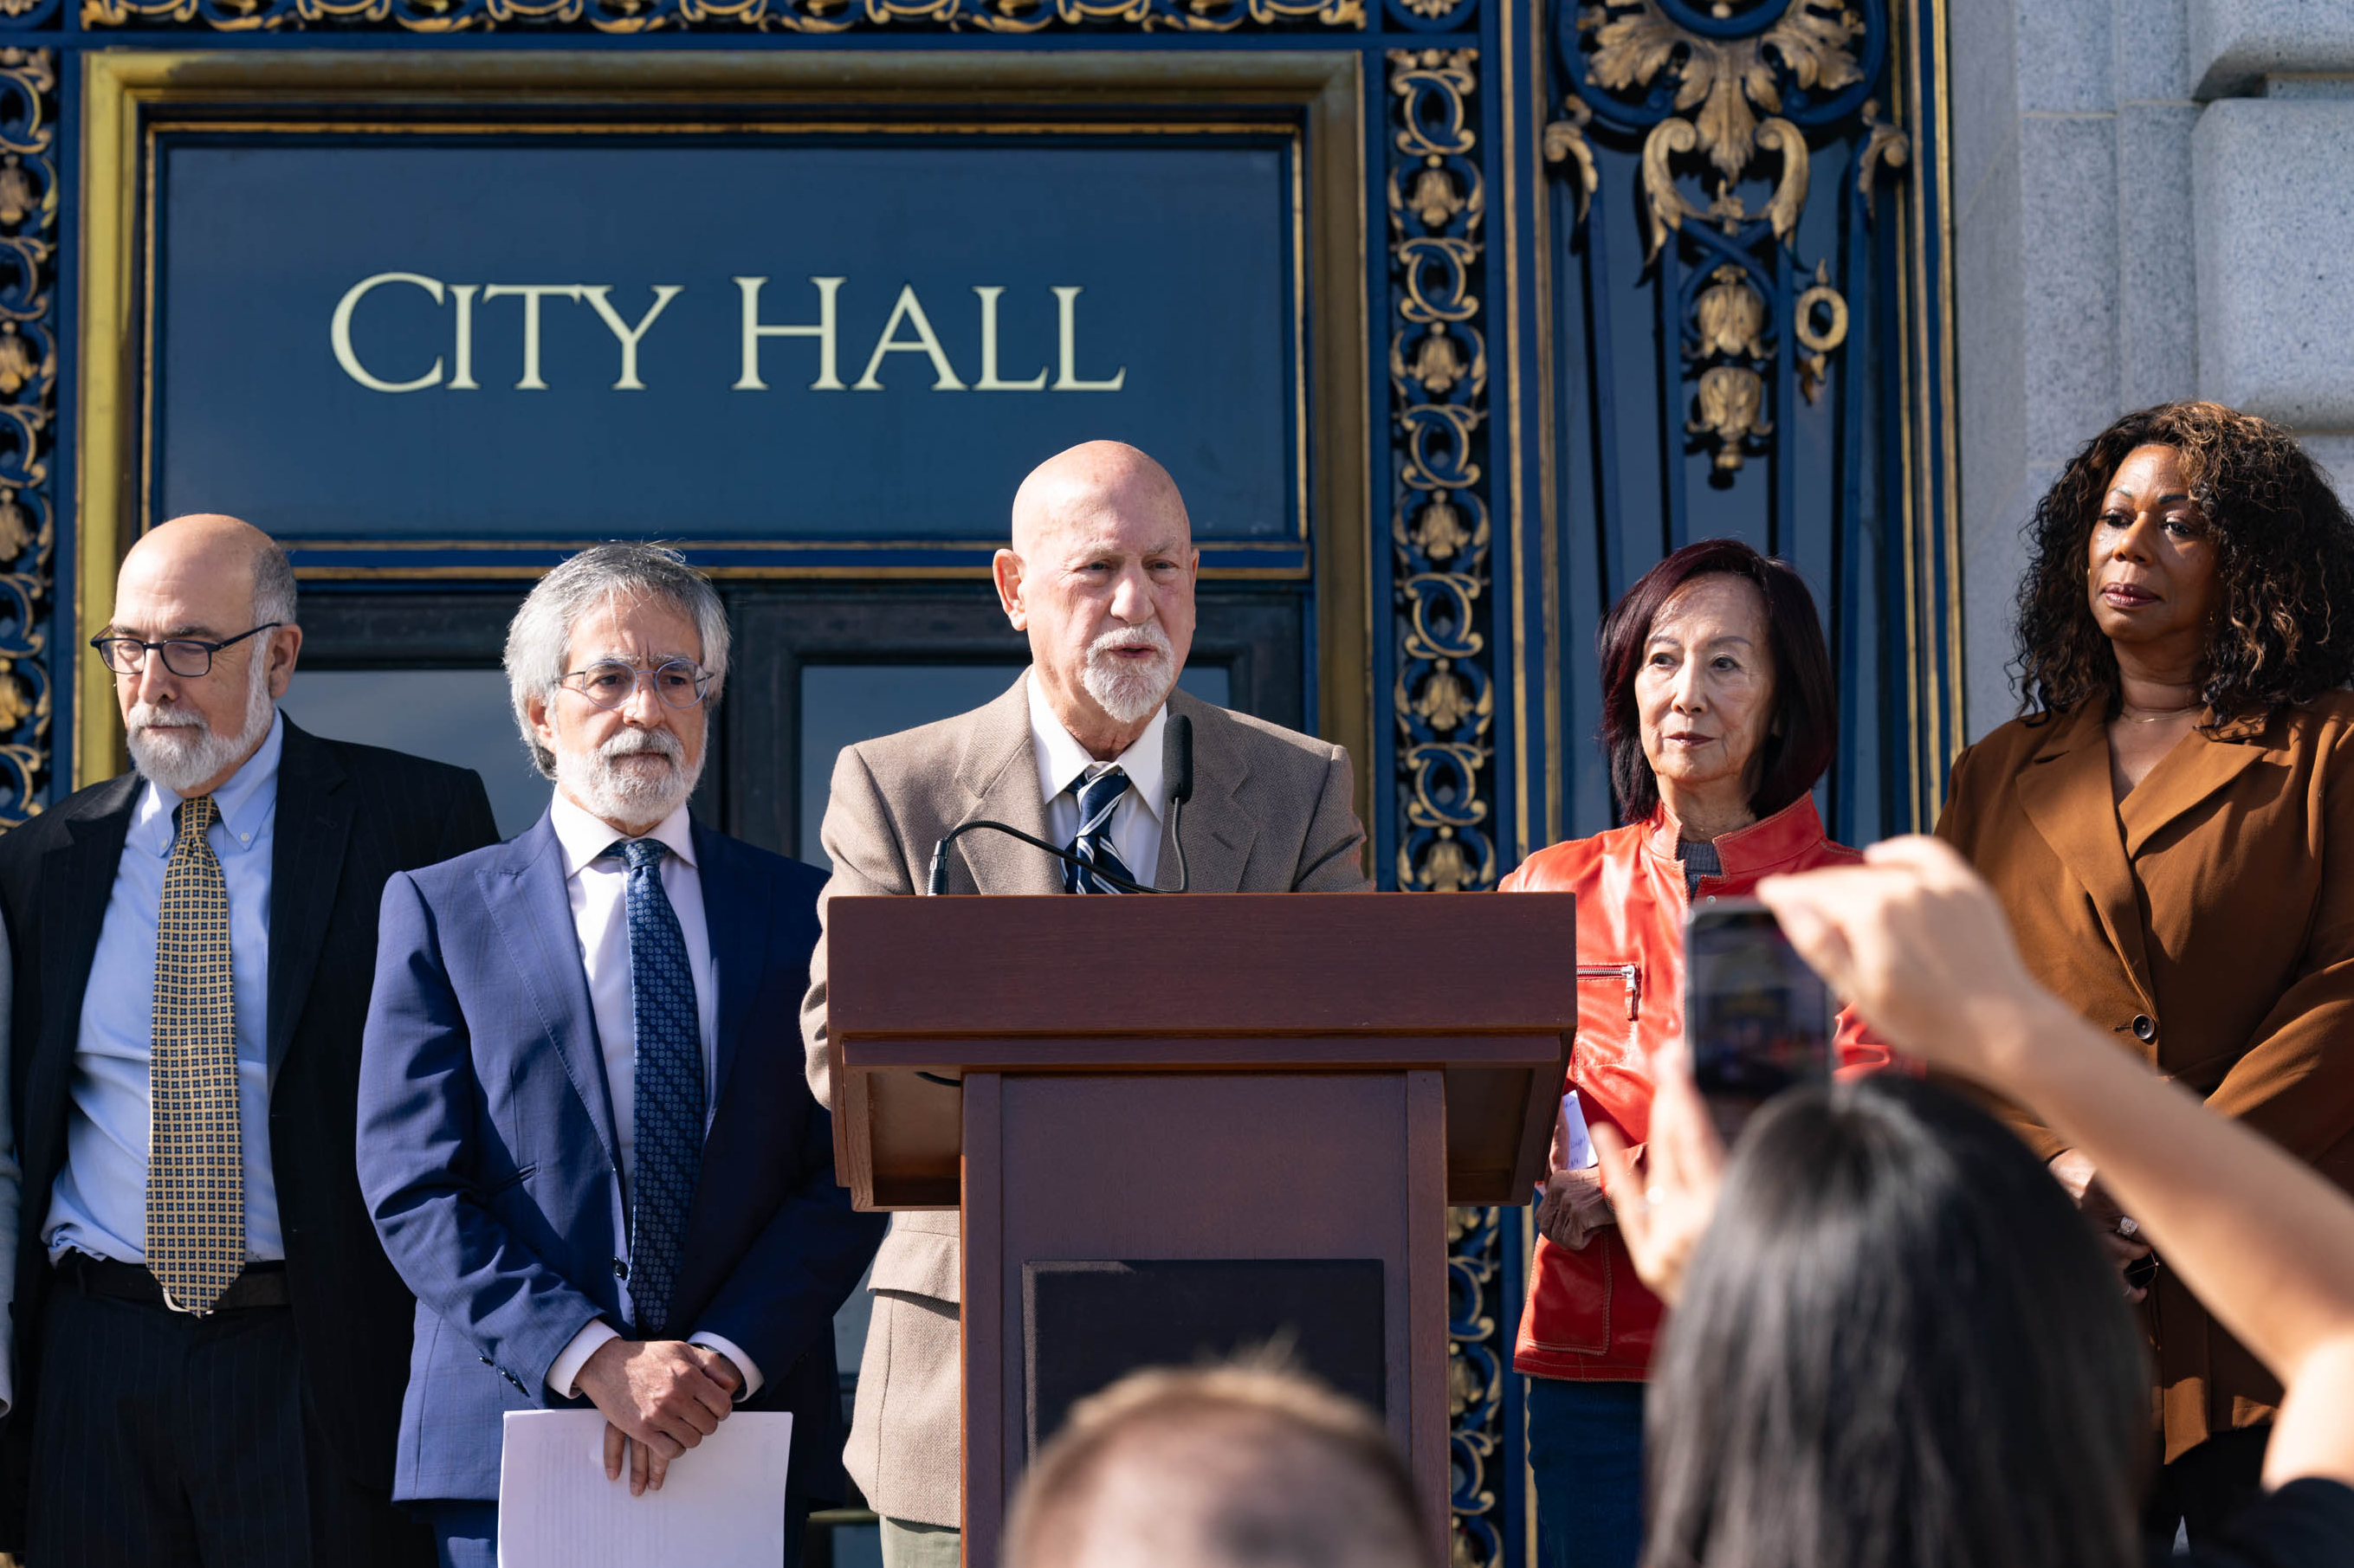 A man standing behind a podium speaks to an audience whit standing in front of a facade that reads &quot;CITY HALL&quot; as 4 other people stand beside him looking on.